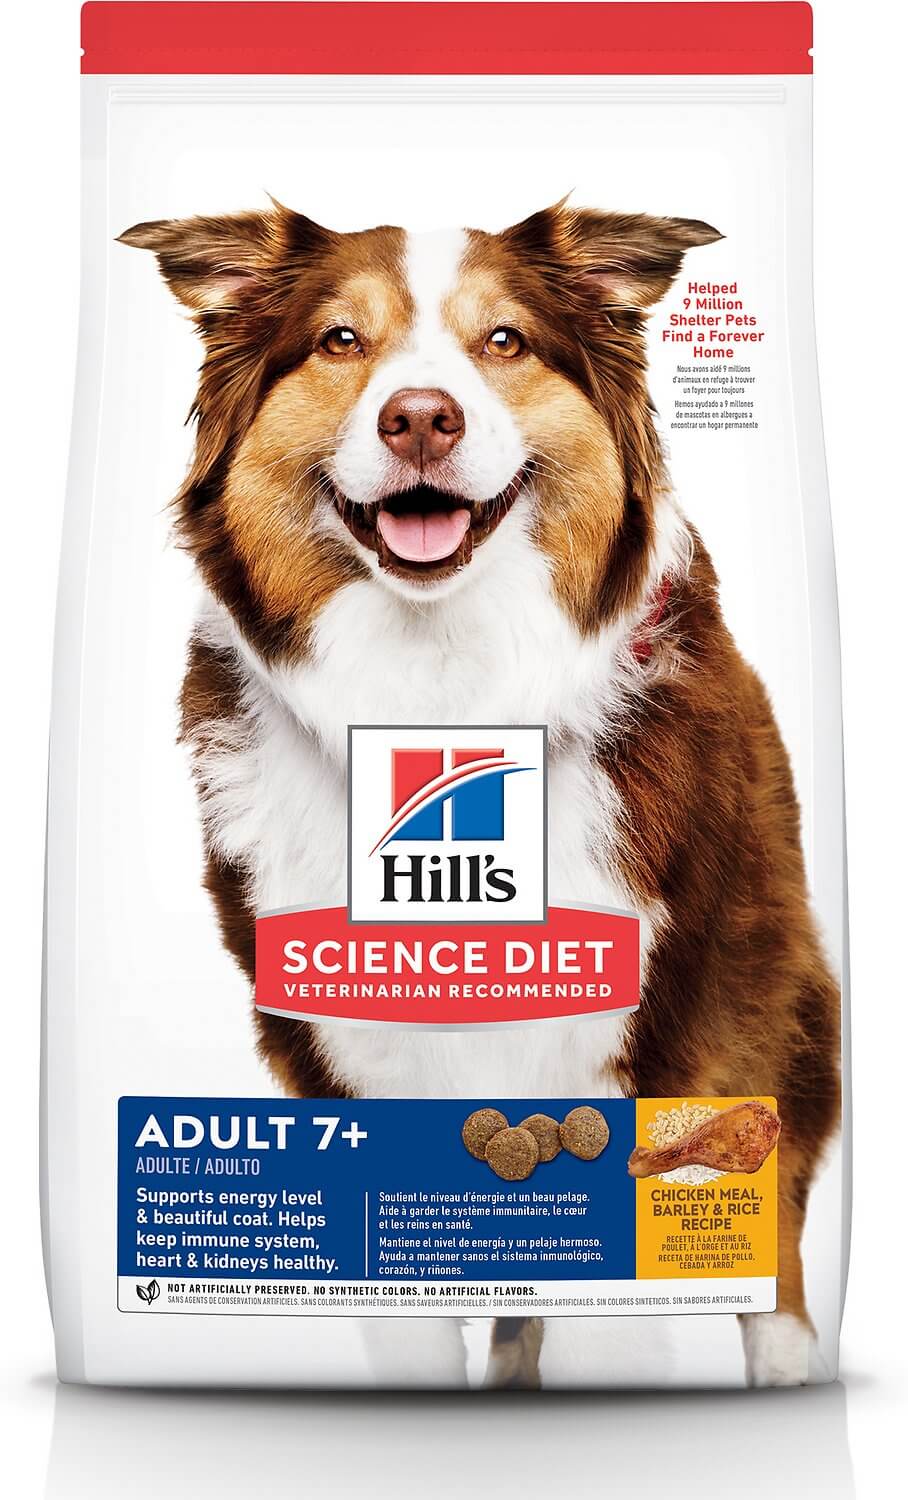 Hill's Science Diet Adult+ Dog Food Review | DogFoodAdvisor